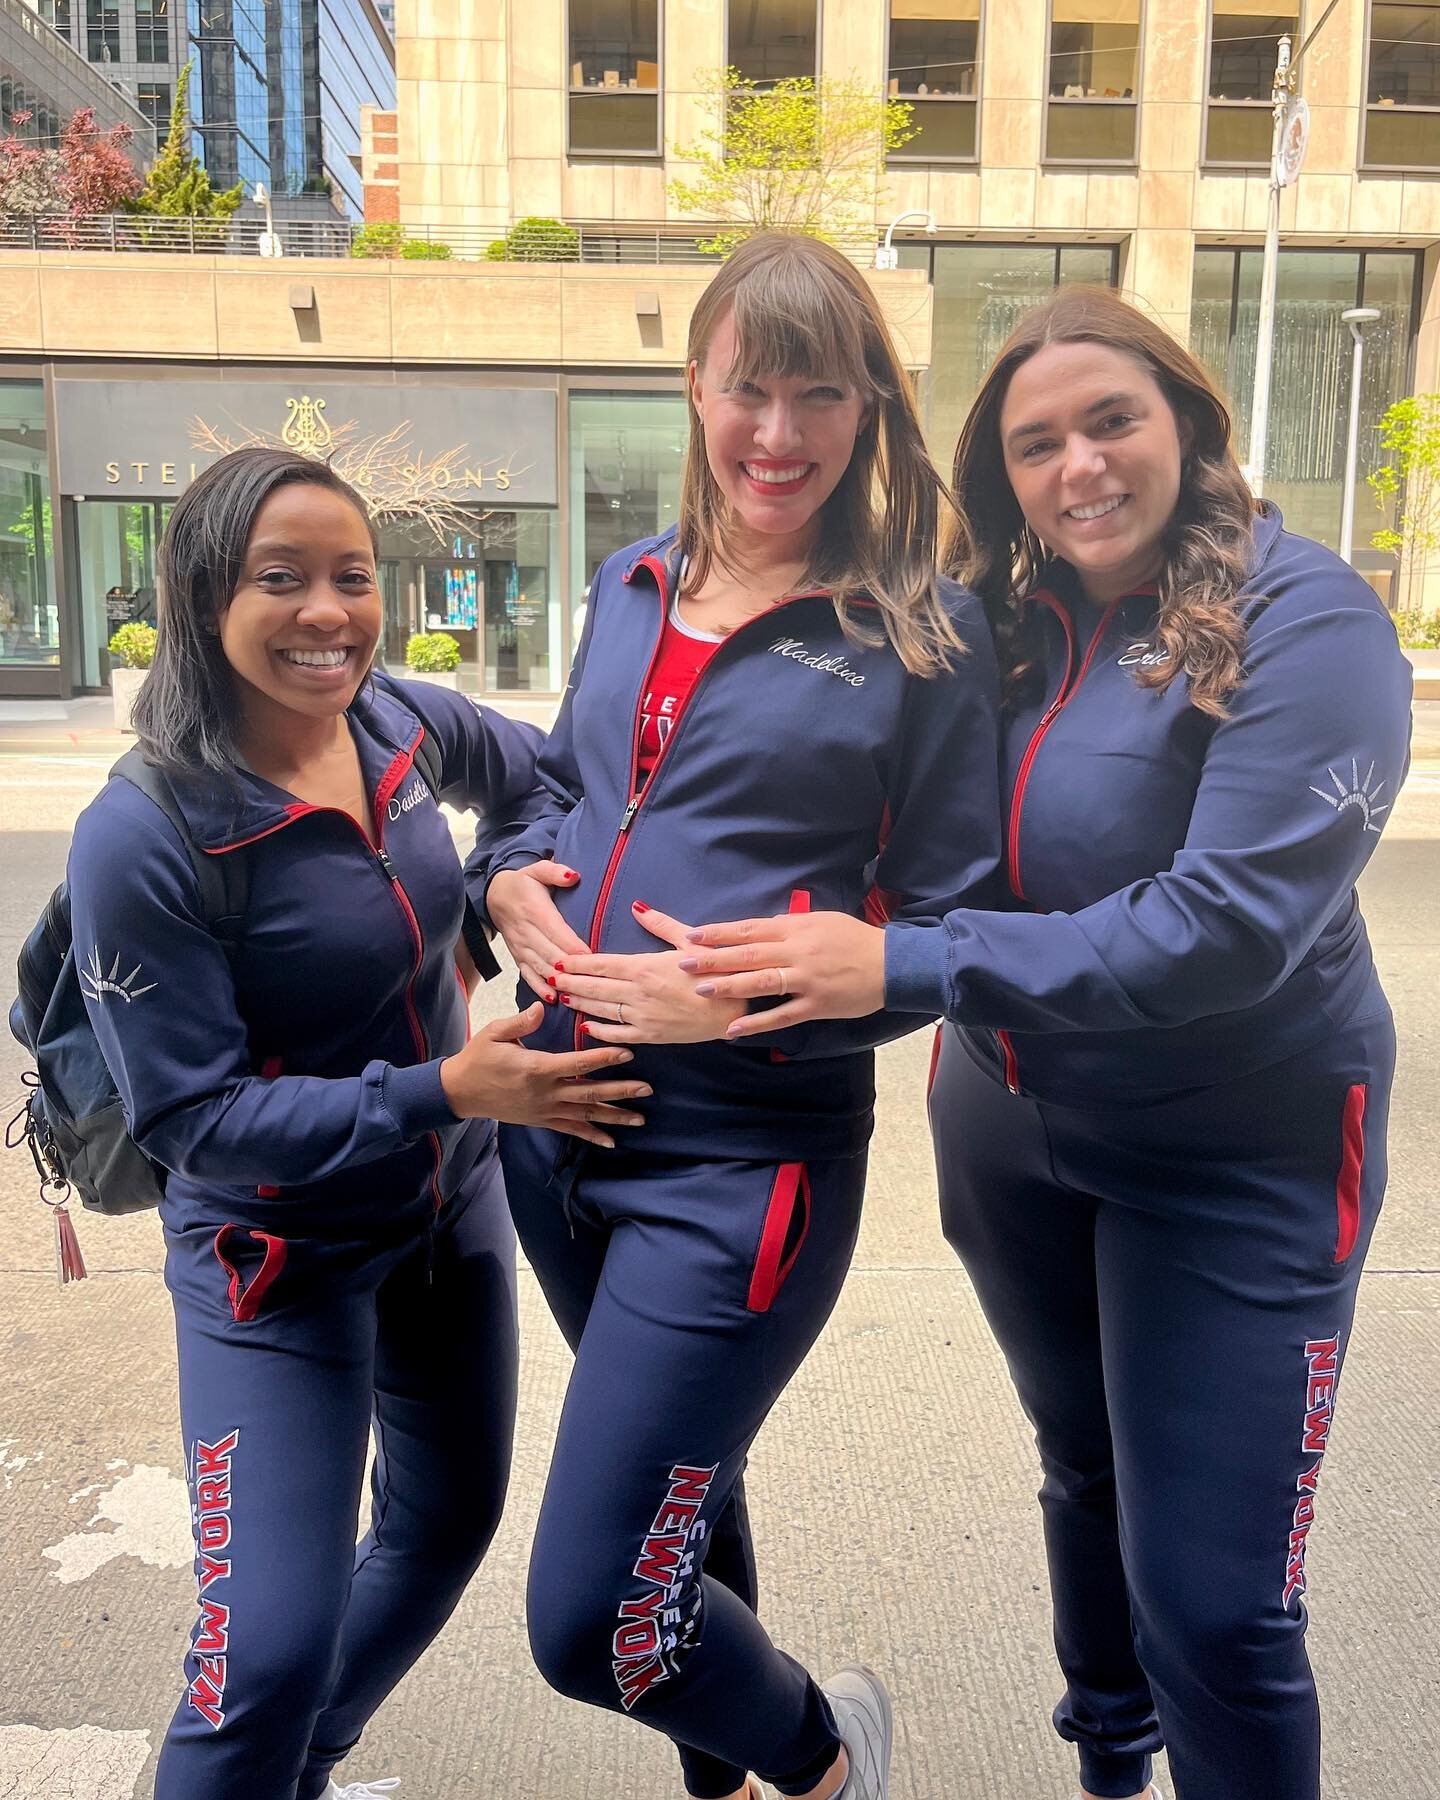 Wishing all our Cheer New York mamas (and soon-to-be-mamas) a very happy Mother&rsquo;s Day tomorrow! 💙❤️

How are you celebrating with your mom? Drop a comment below!